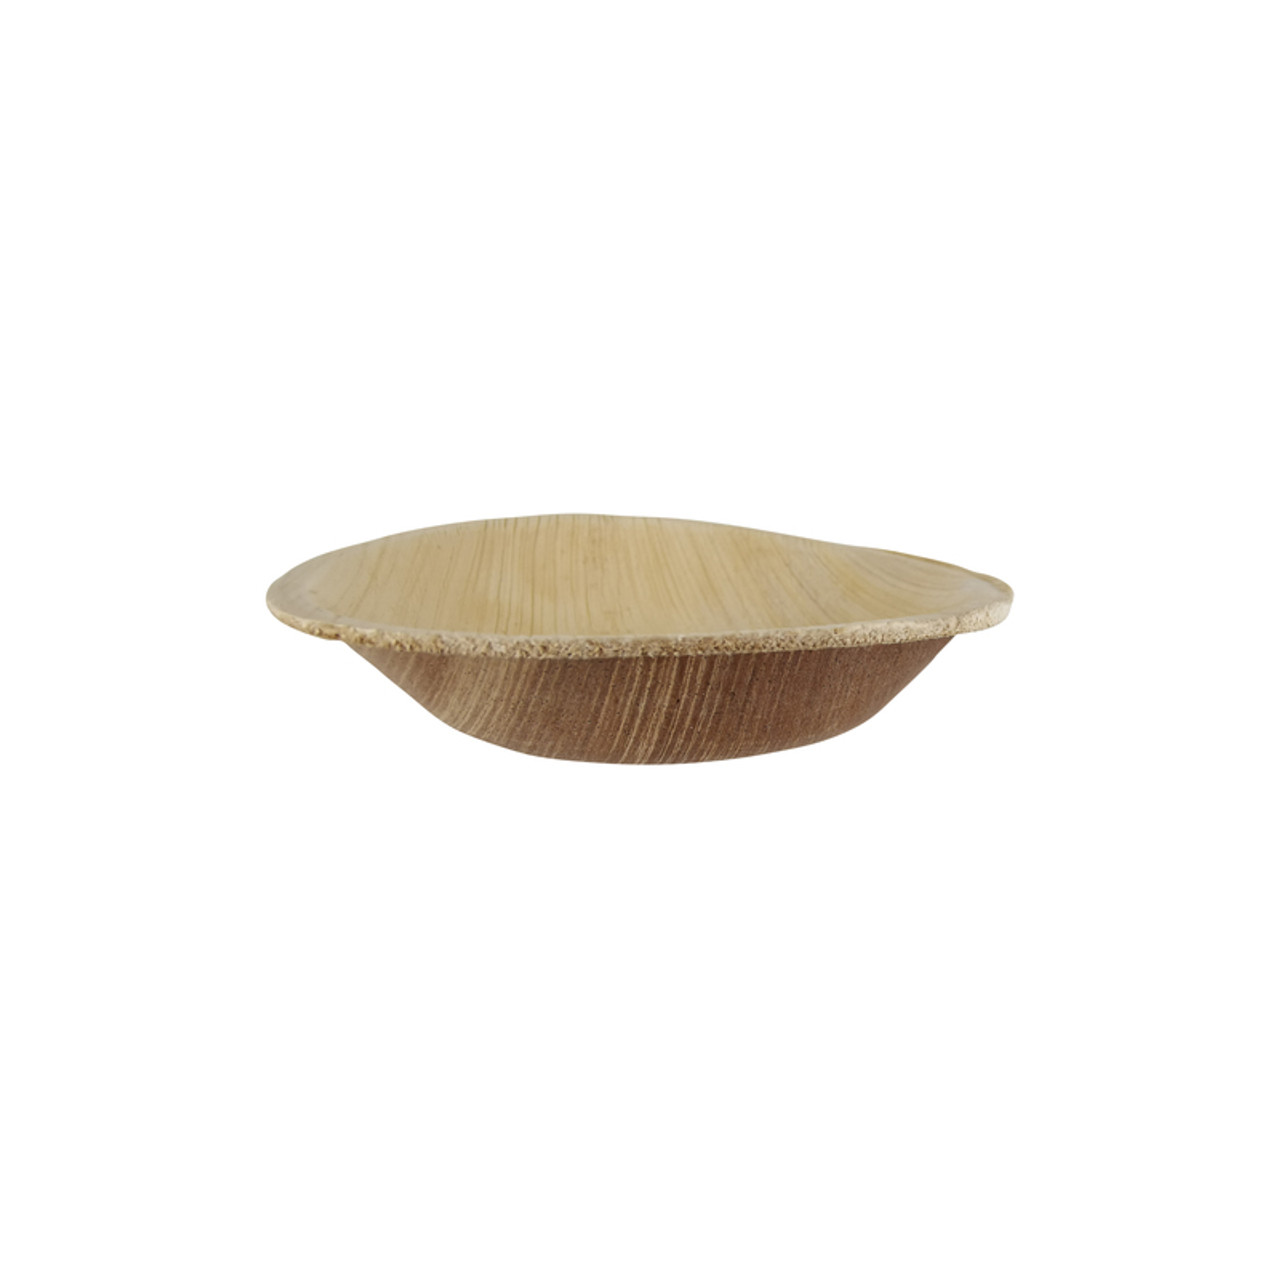 Palmbowl Palm Leaf Round Bowl - 3oz D:4in H:0.8in - 100 pcs